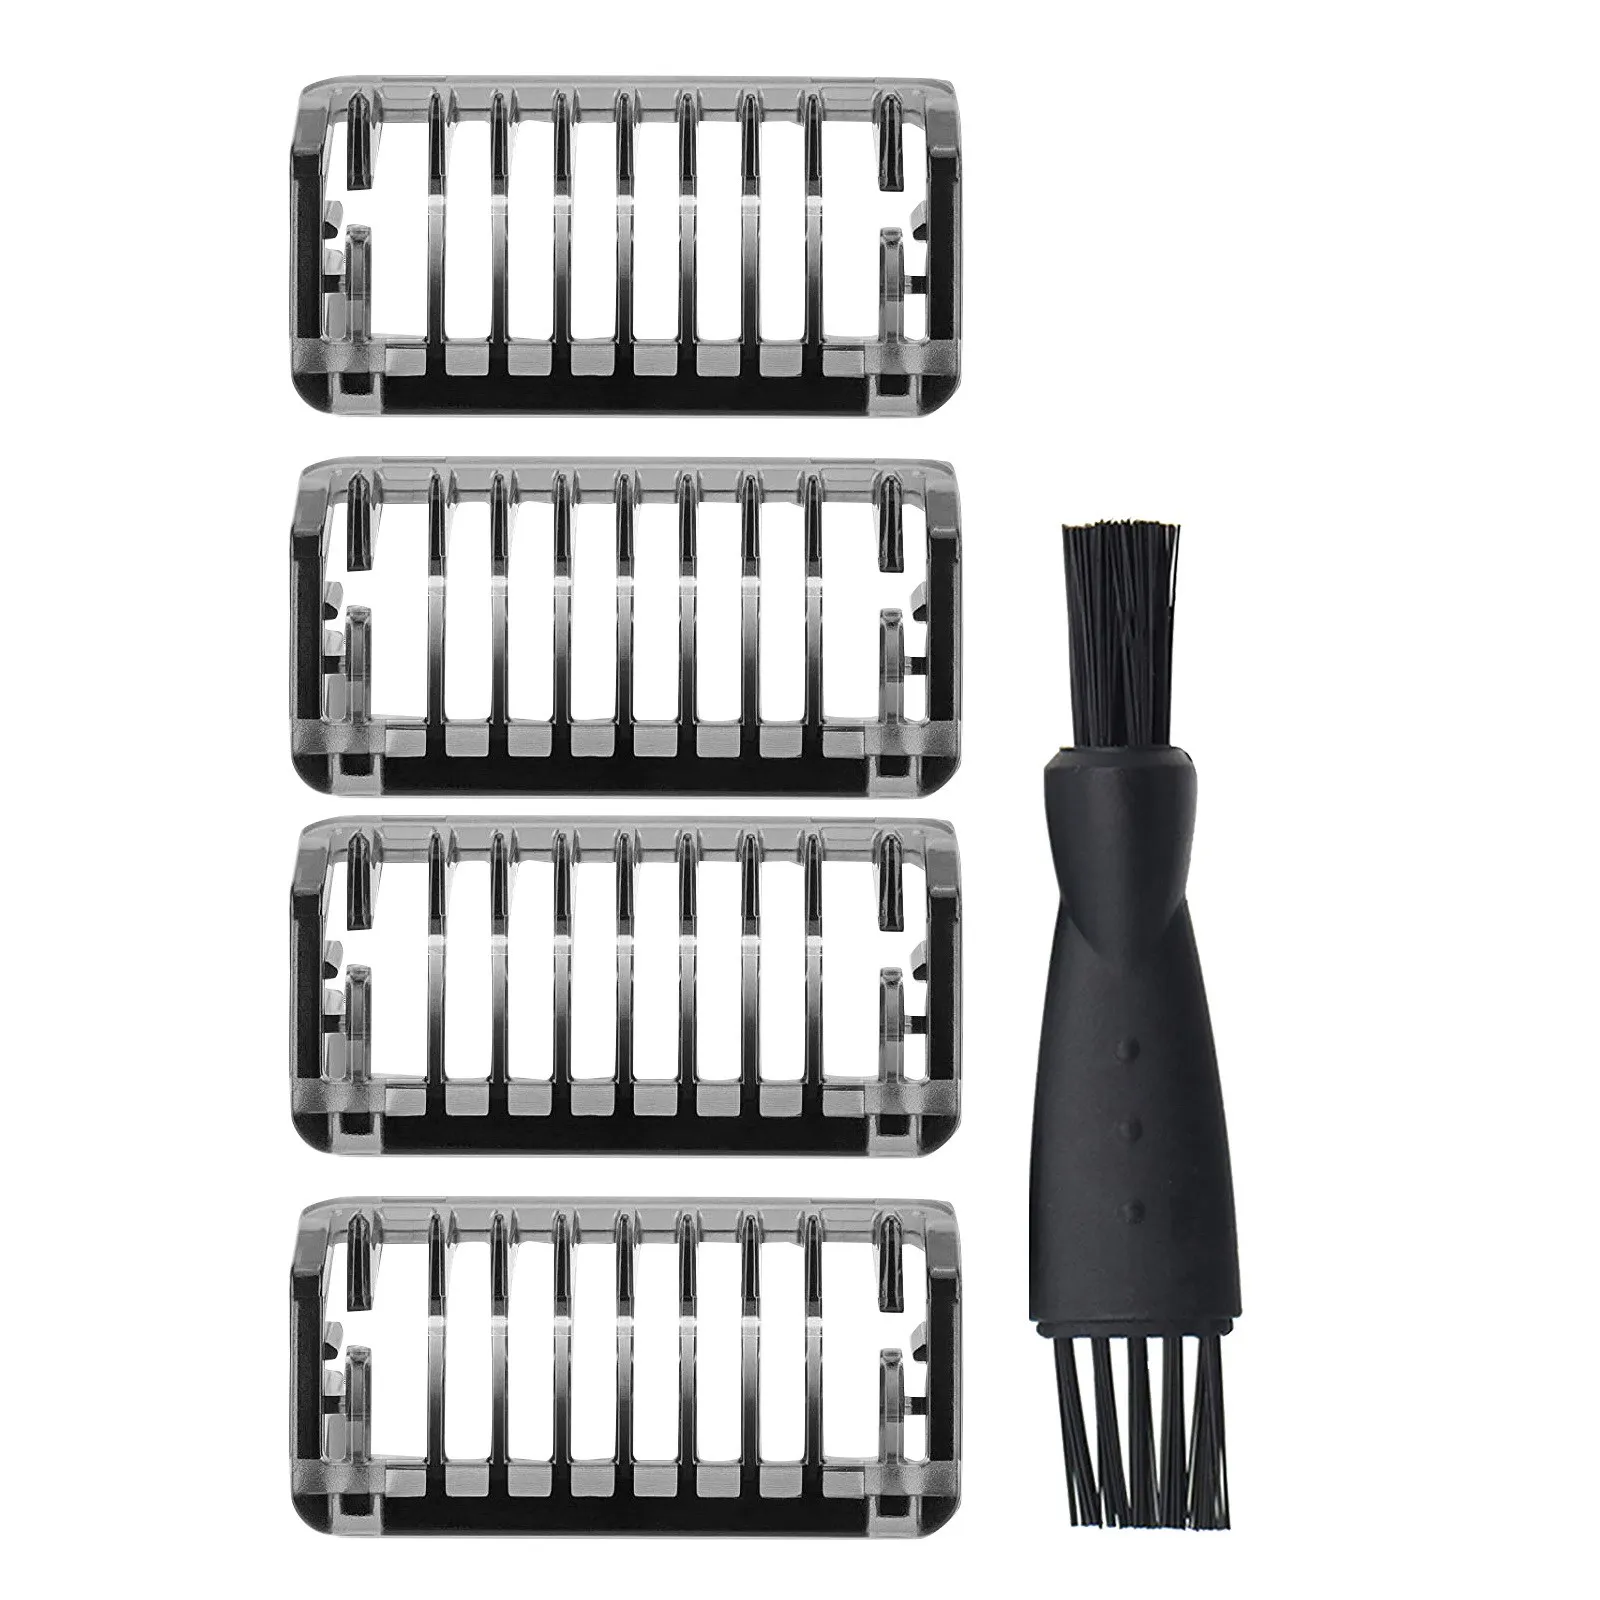 

5 Pack 1 2 3 5mm Guide Comb for Philips Norelco OneBlade Comb Cutting,QP210/50 QP 220 2523 2520 2527 6520